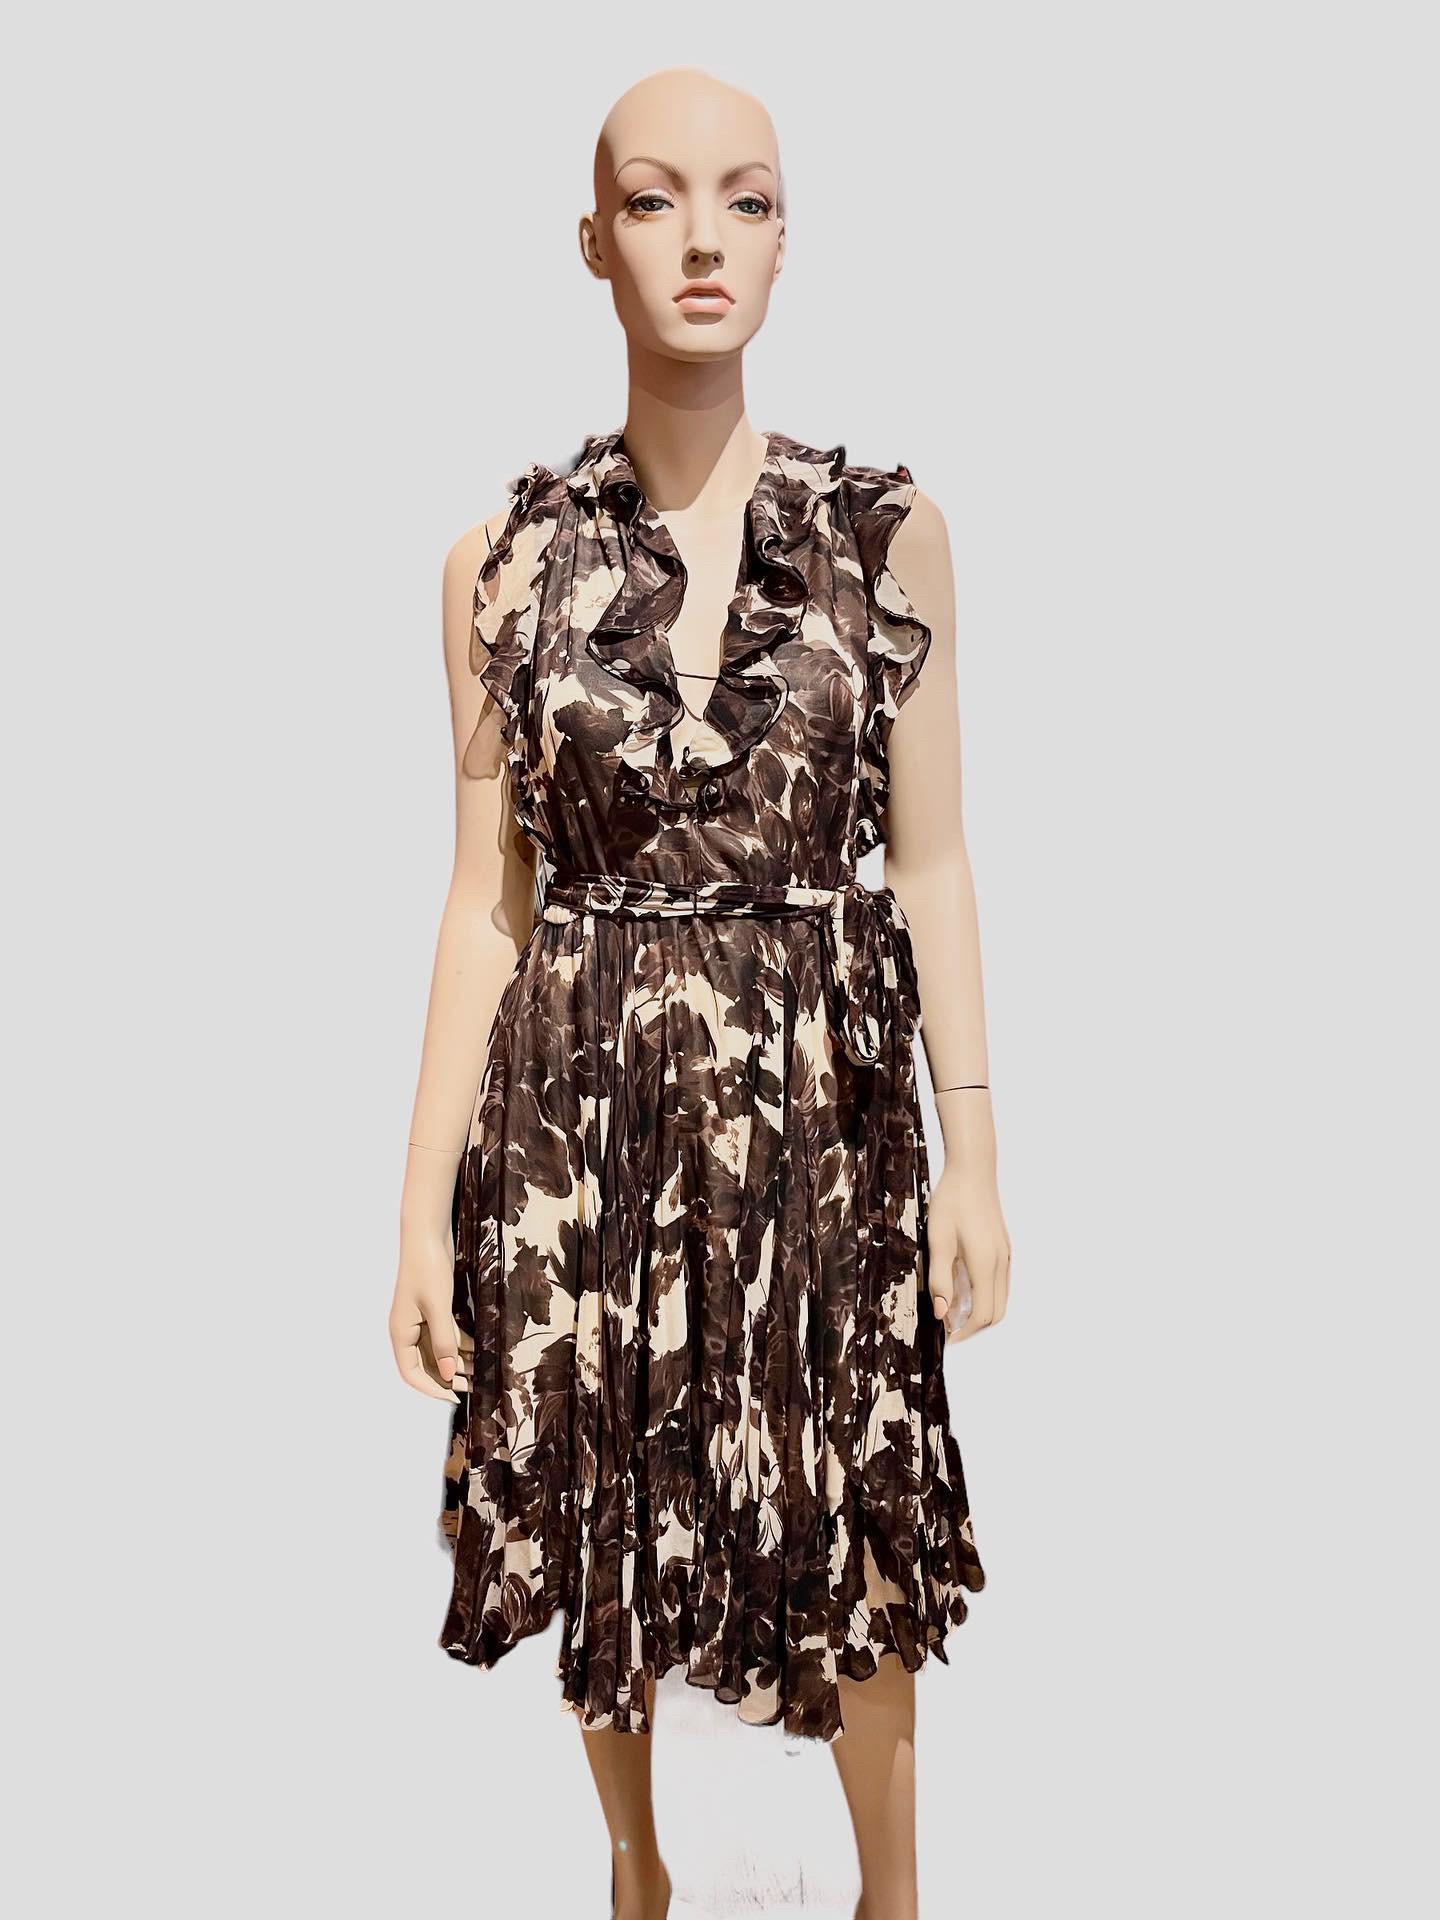 Gorgeous Stephen Burrows Brown & Cream Silk Chiffon Abstract Floral Print Ruffle Dress

Bust: 34”
Waist: 28”
Length: 41”

Labeled size 10.

Stephen Burrows is an American fashion designer based in New York City, known for being one of the first